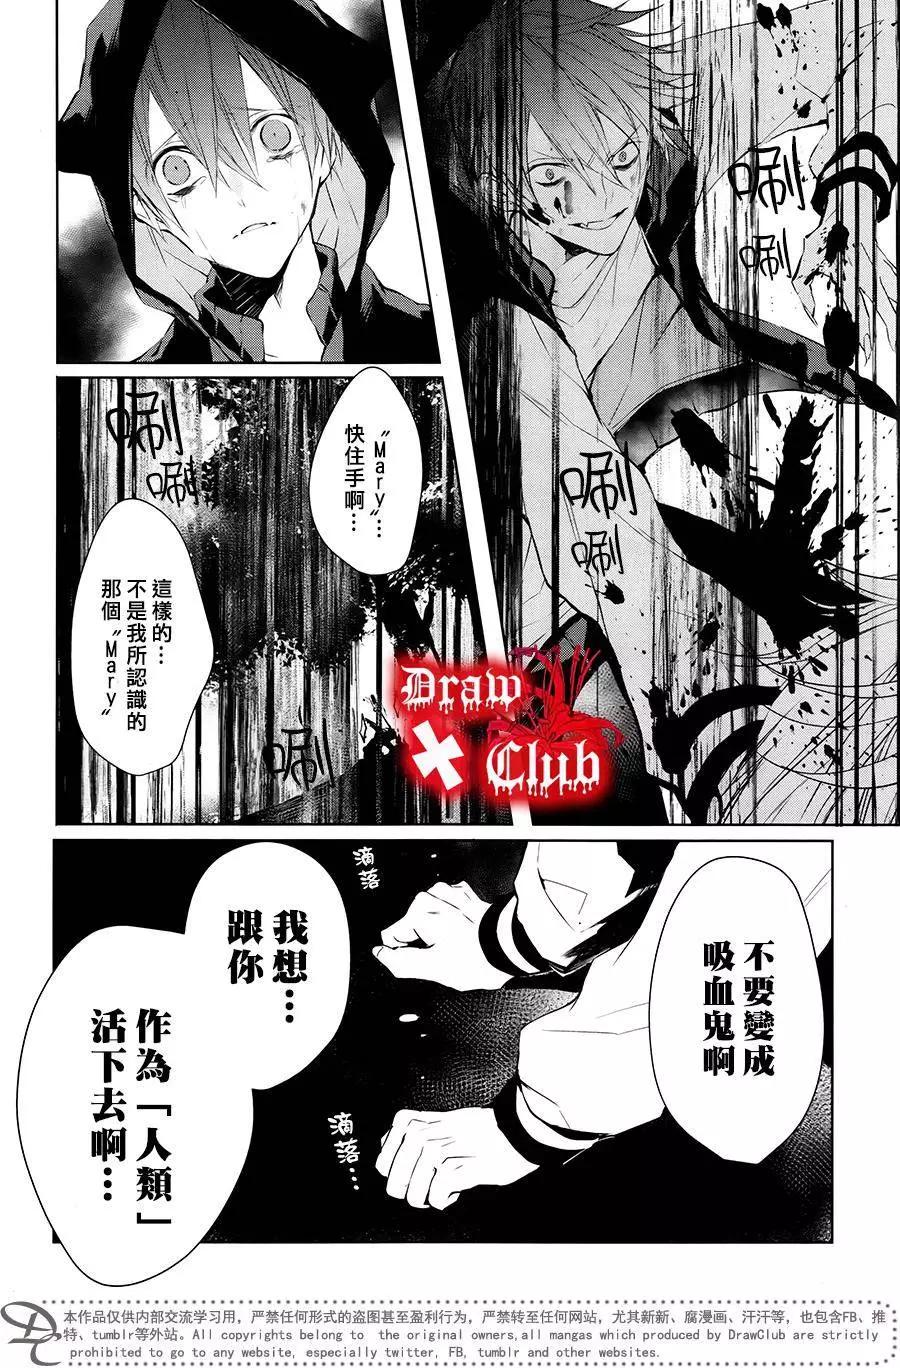 Bloody Mary - 第32回 - 4